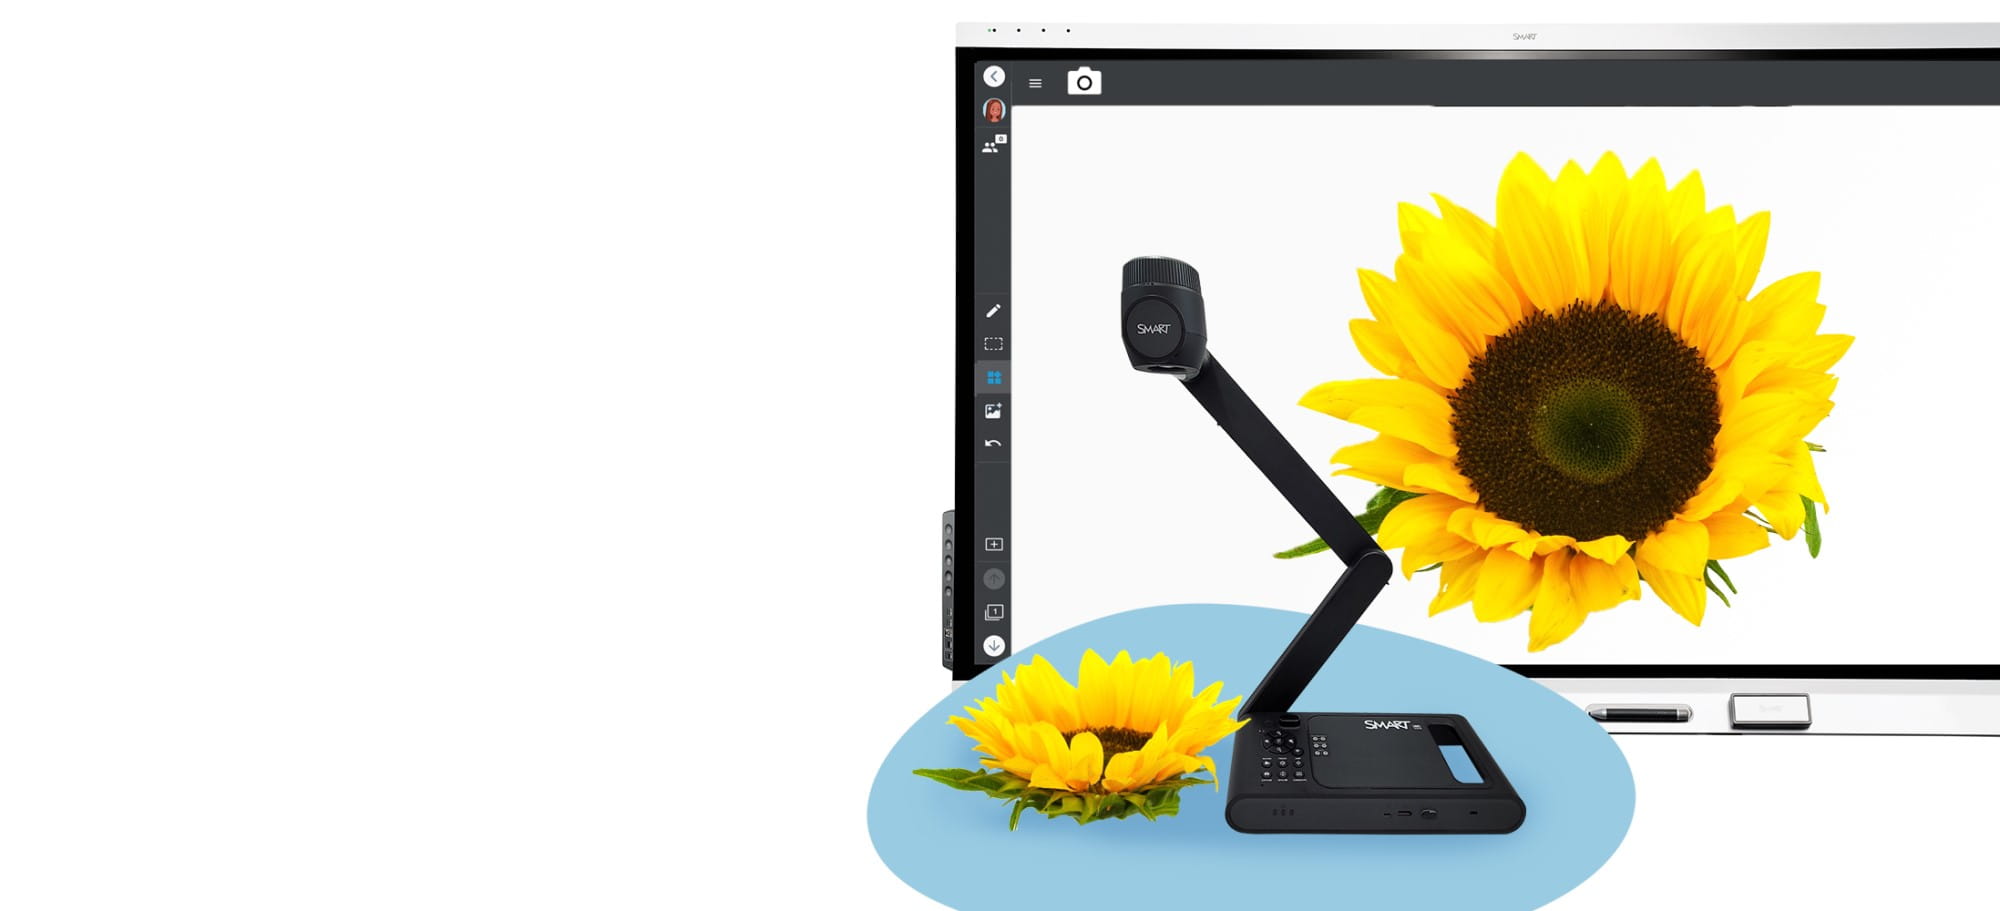 The SMART Document Camera 650, with its sleek black design, is positioned to display a vibrant sunflower on a screen, illustrating its capability to bring vivid, real-world imagery into the classroom.